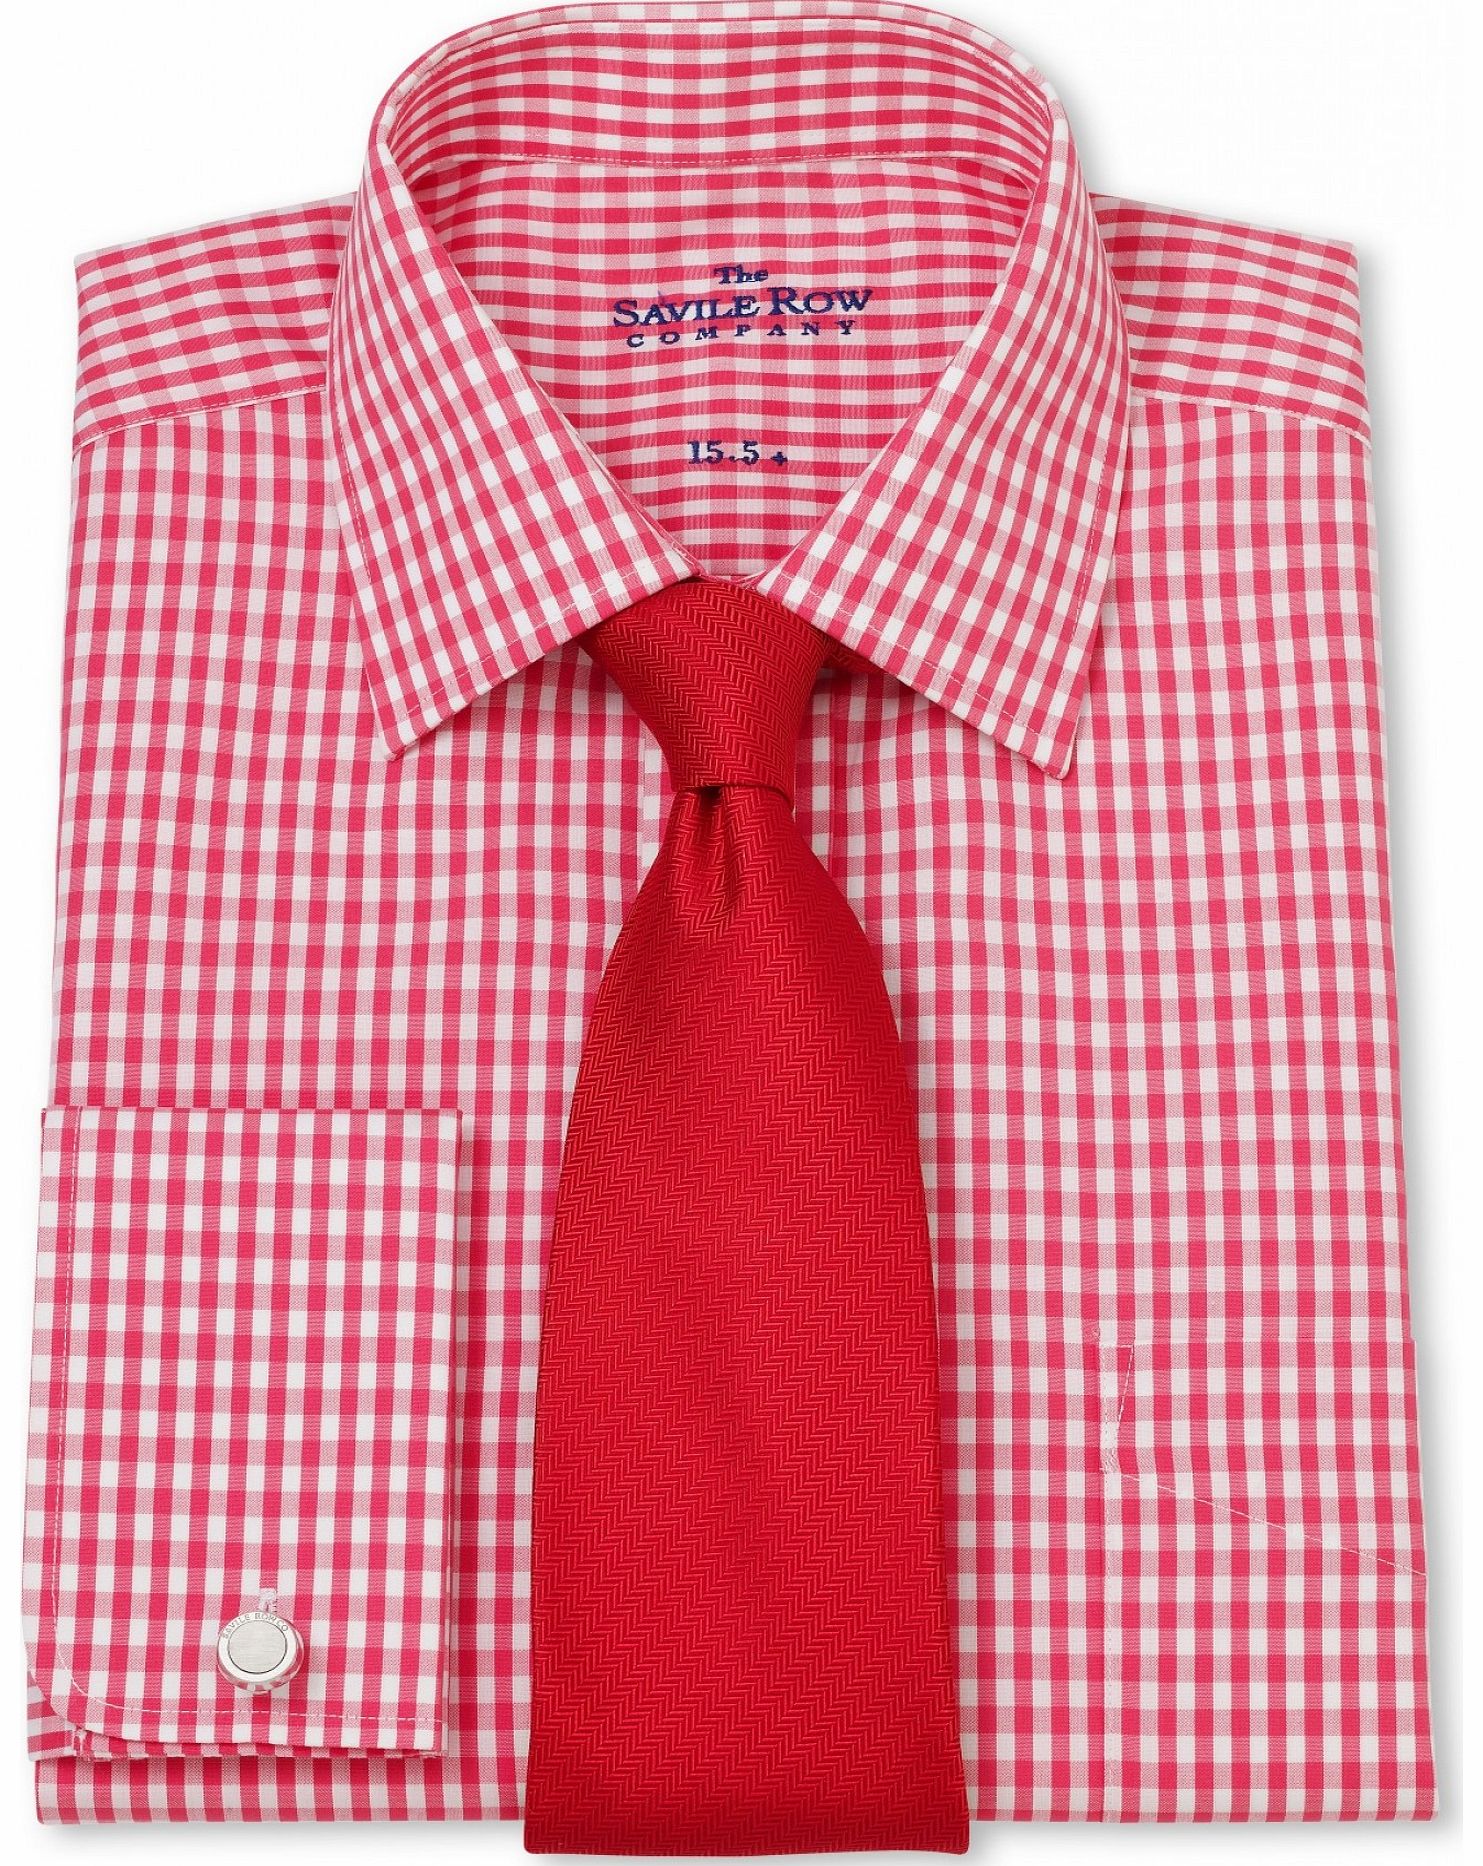 Savile Row Company Pink White Gingham Check Classic Fit Shirt 17``